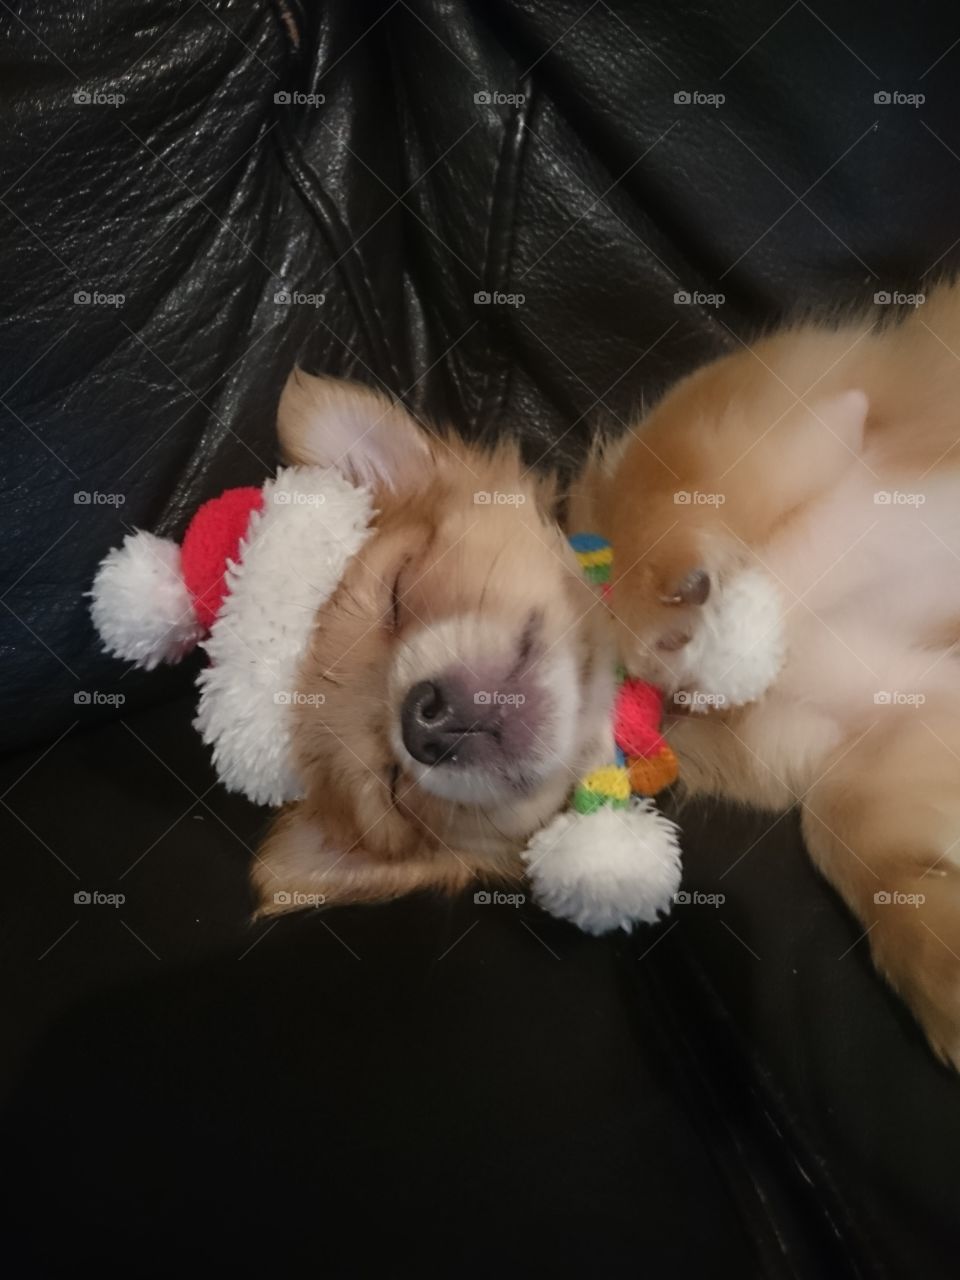 Santa will only come if you go straight to sleep!